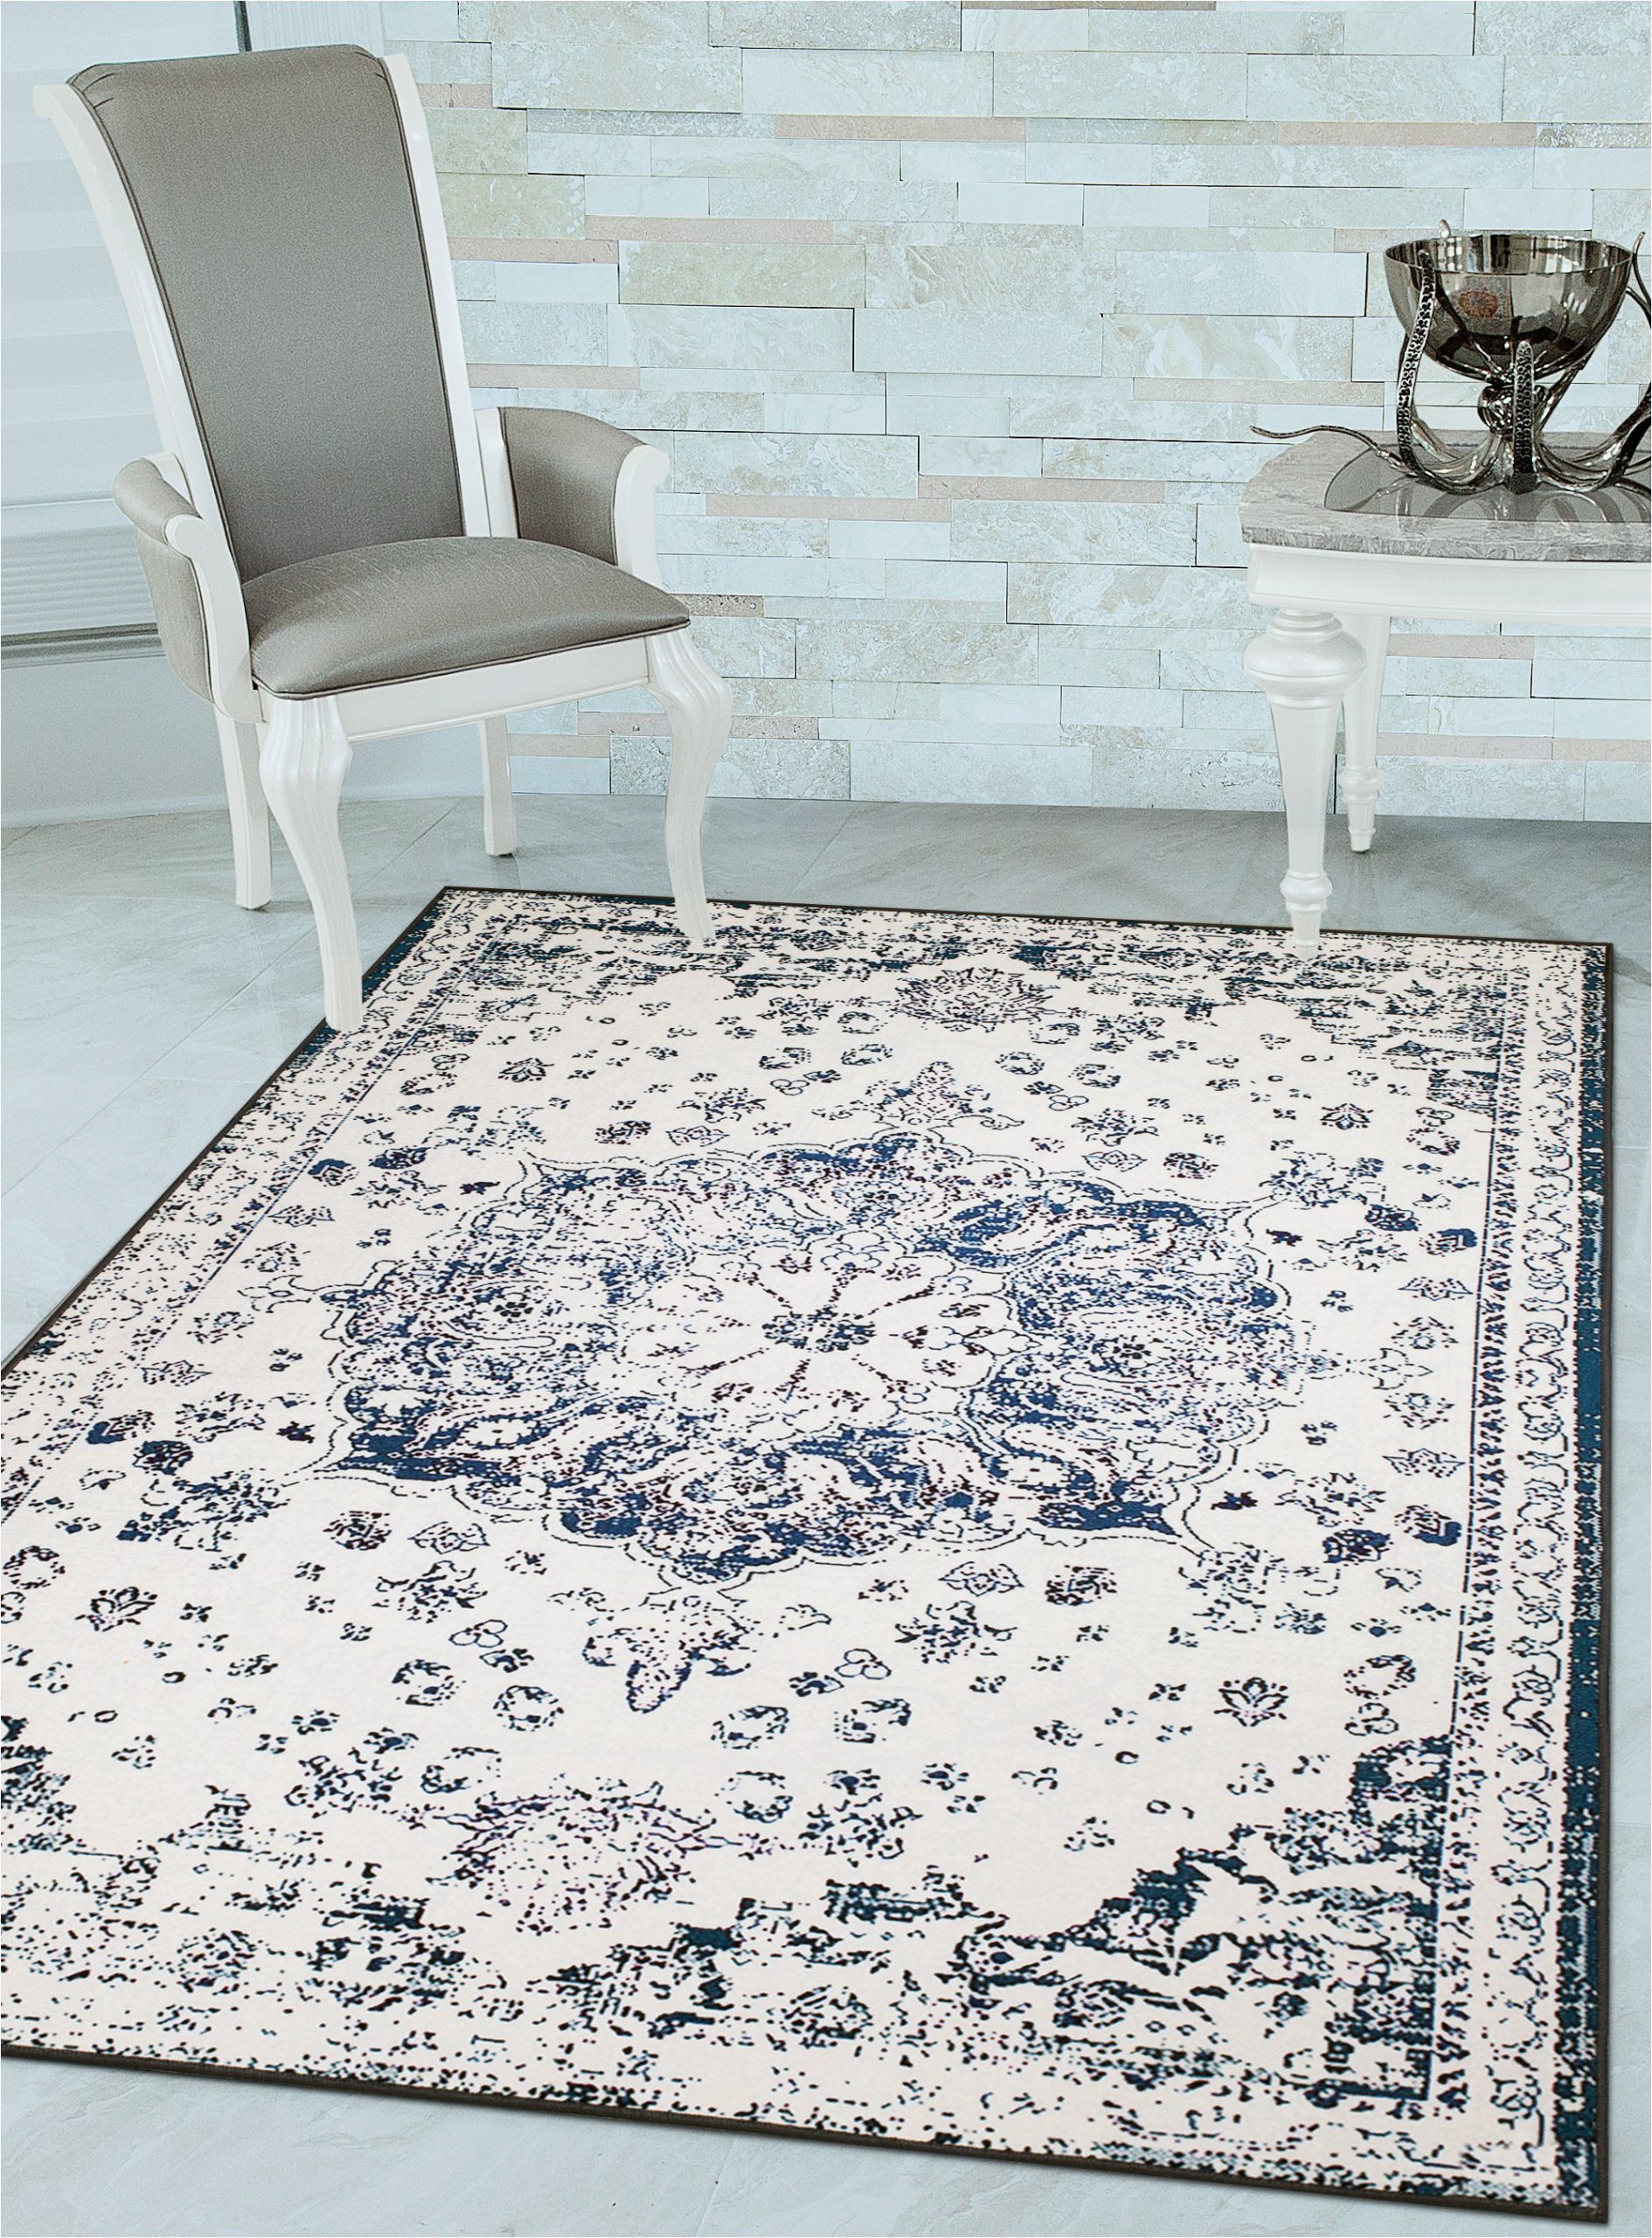 5×7 Latex Backed area Rugs Details About Navy Vintage Medallion oriental Transitional area Rug Non Slip Latex Backing